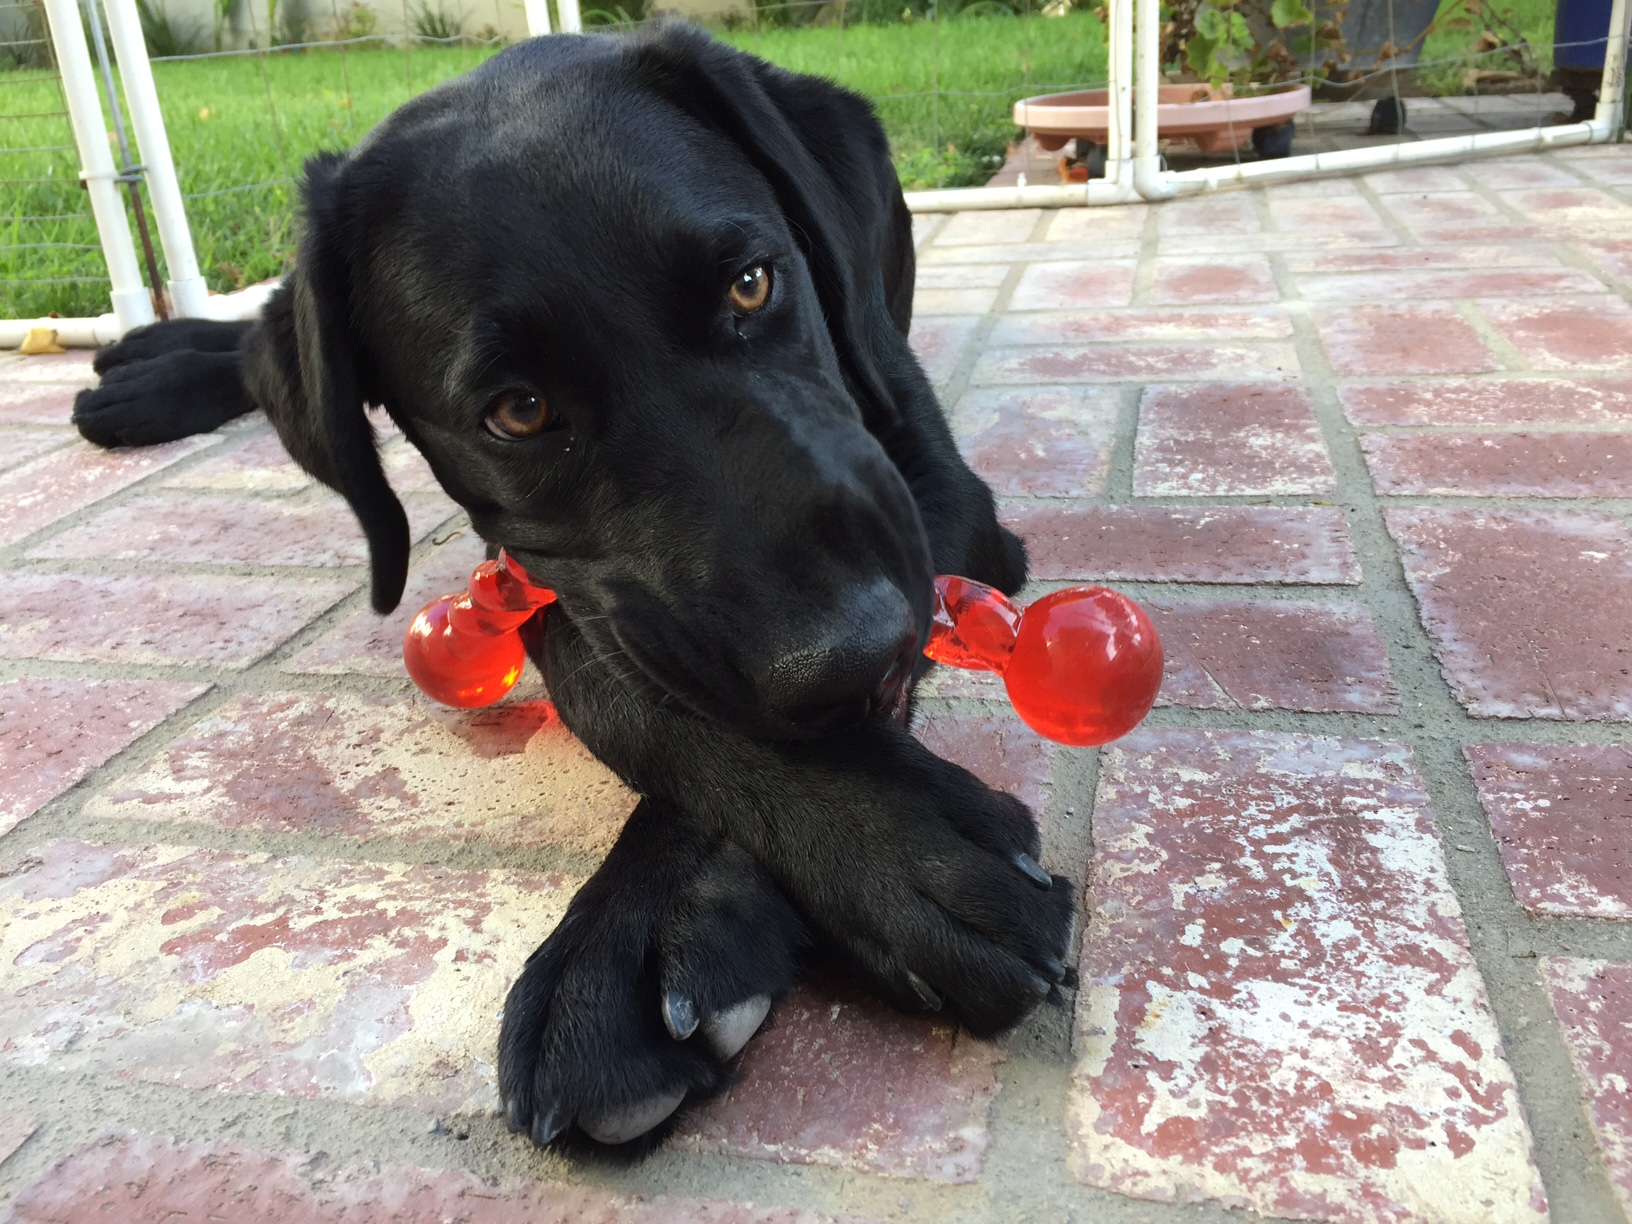 Dash VI with a new Kong toy